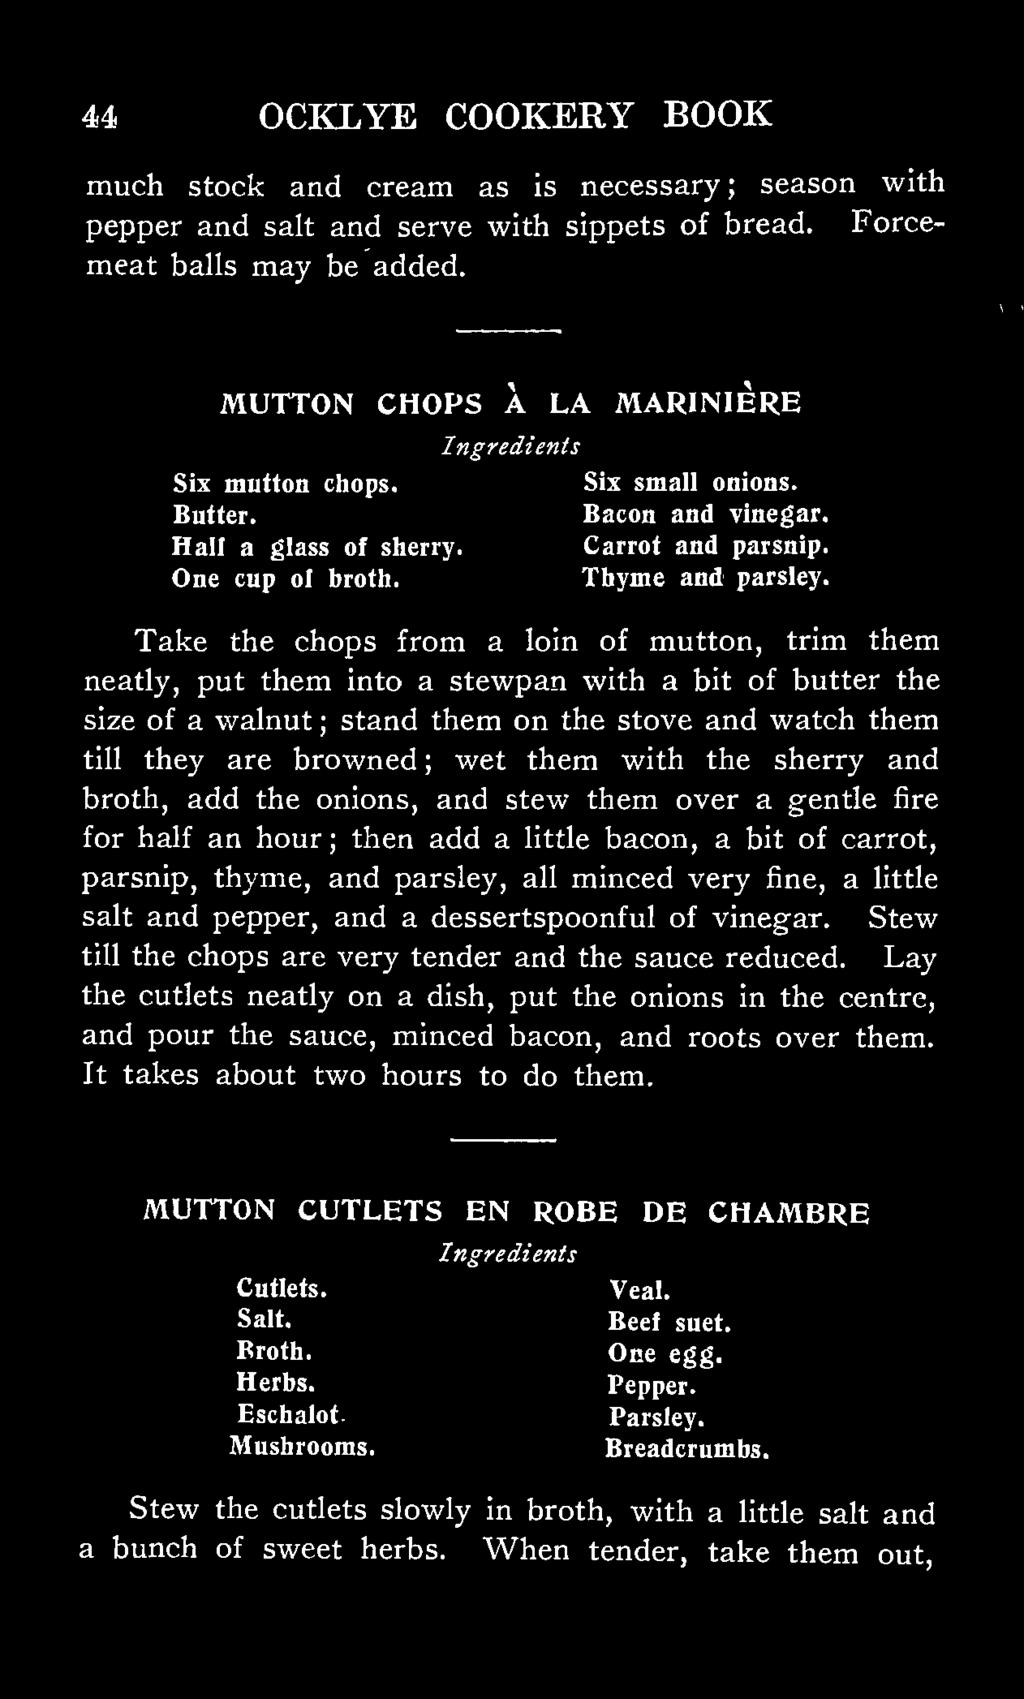 Take the chops from a loin of mutton, trim them neatly, put them into a stewpan with a bit of butter the size of a walnut ; stand them on the stove and watch them till they are browned ; wet them